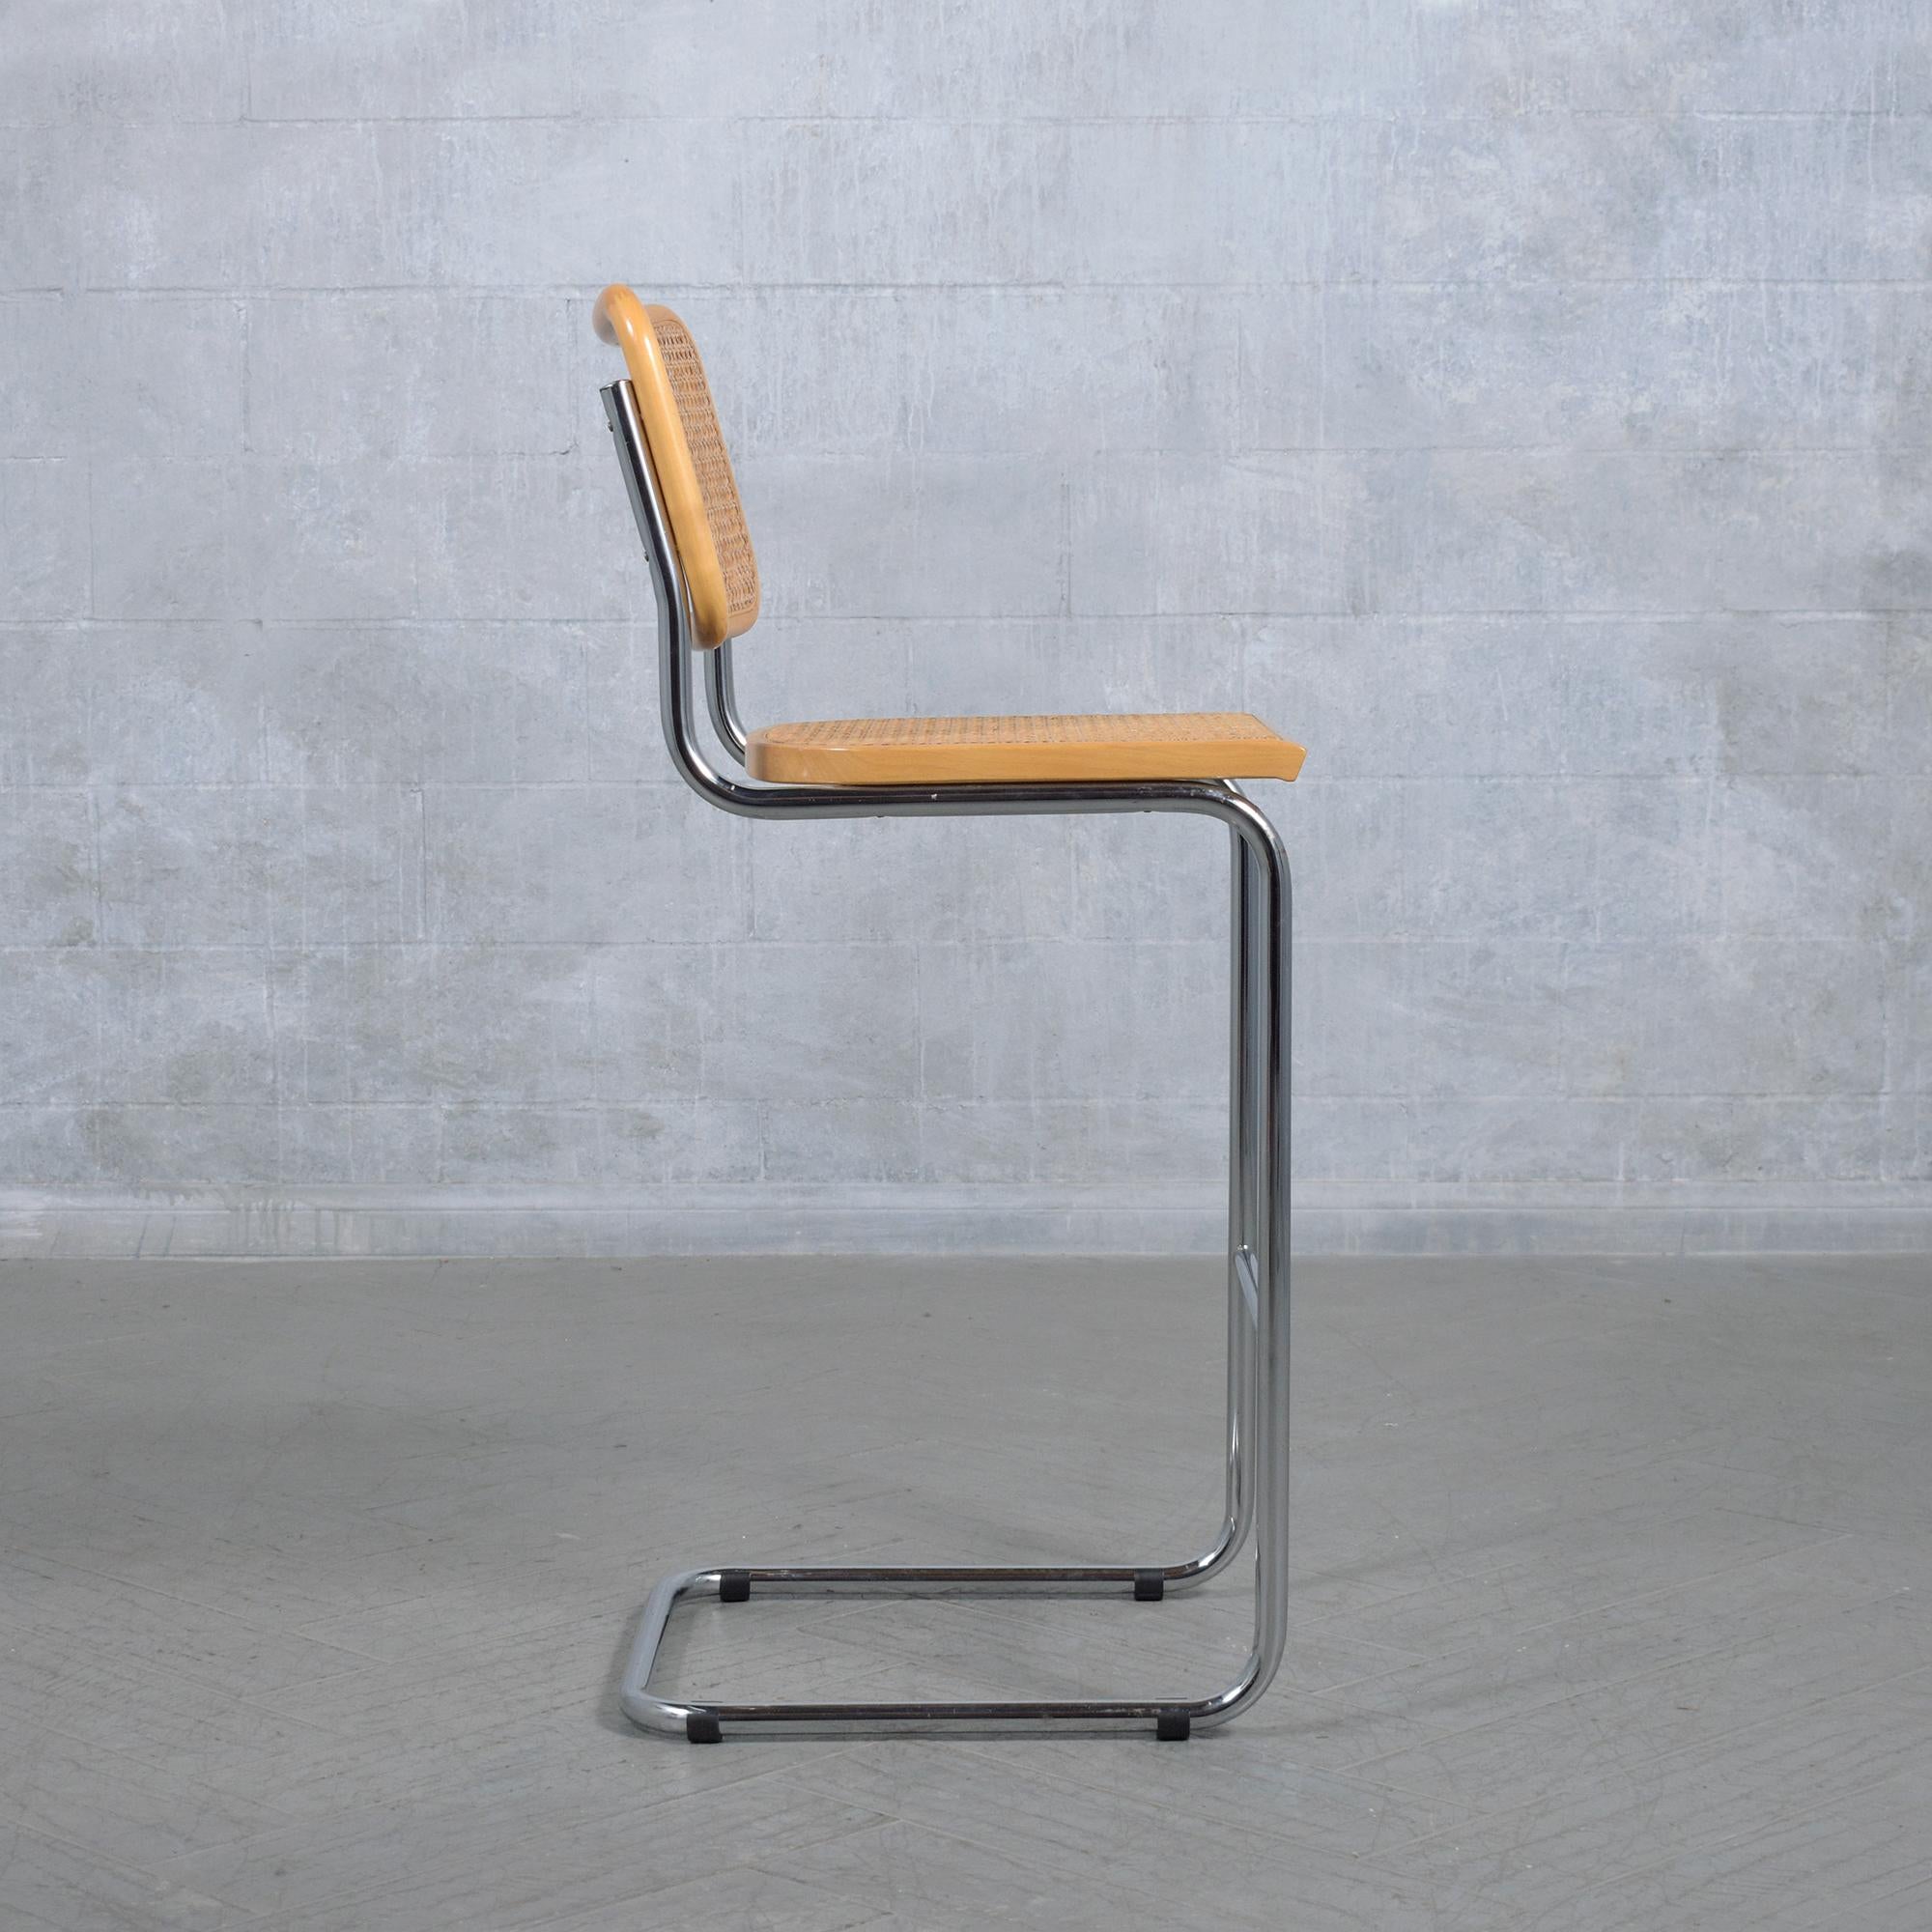 Stained Vintage Italian Caned Bar Stool: Marcel Breuer Style Meets Modern Elegance